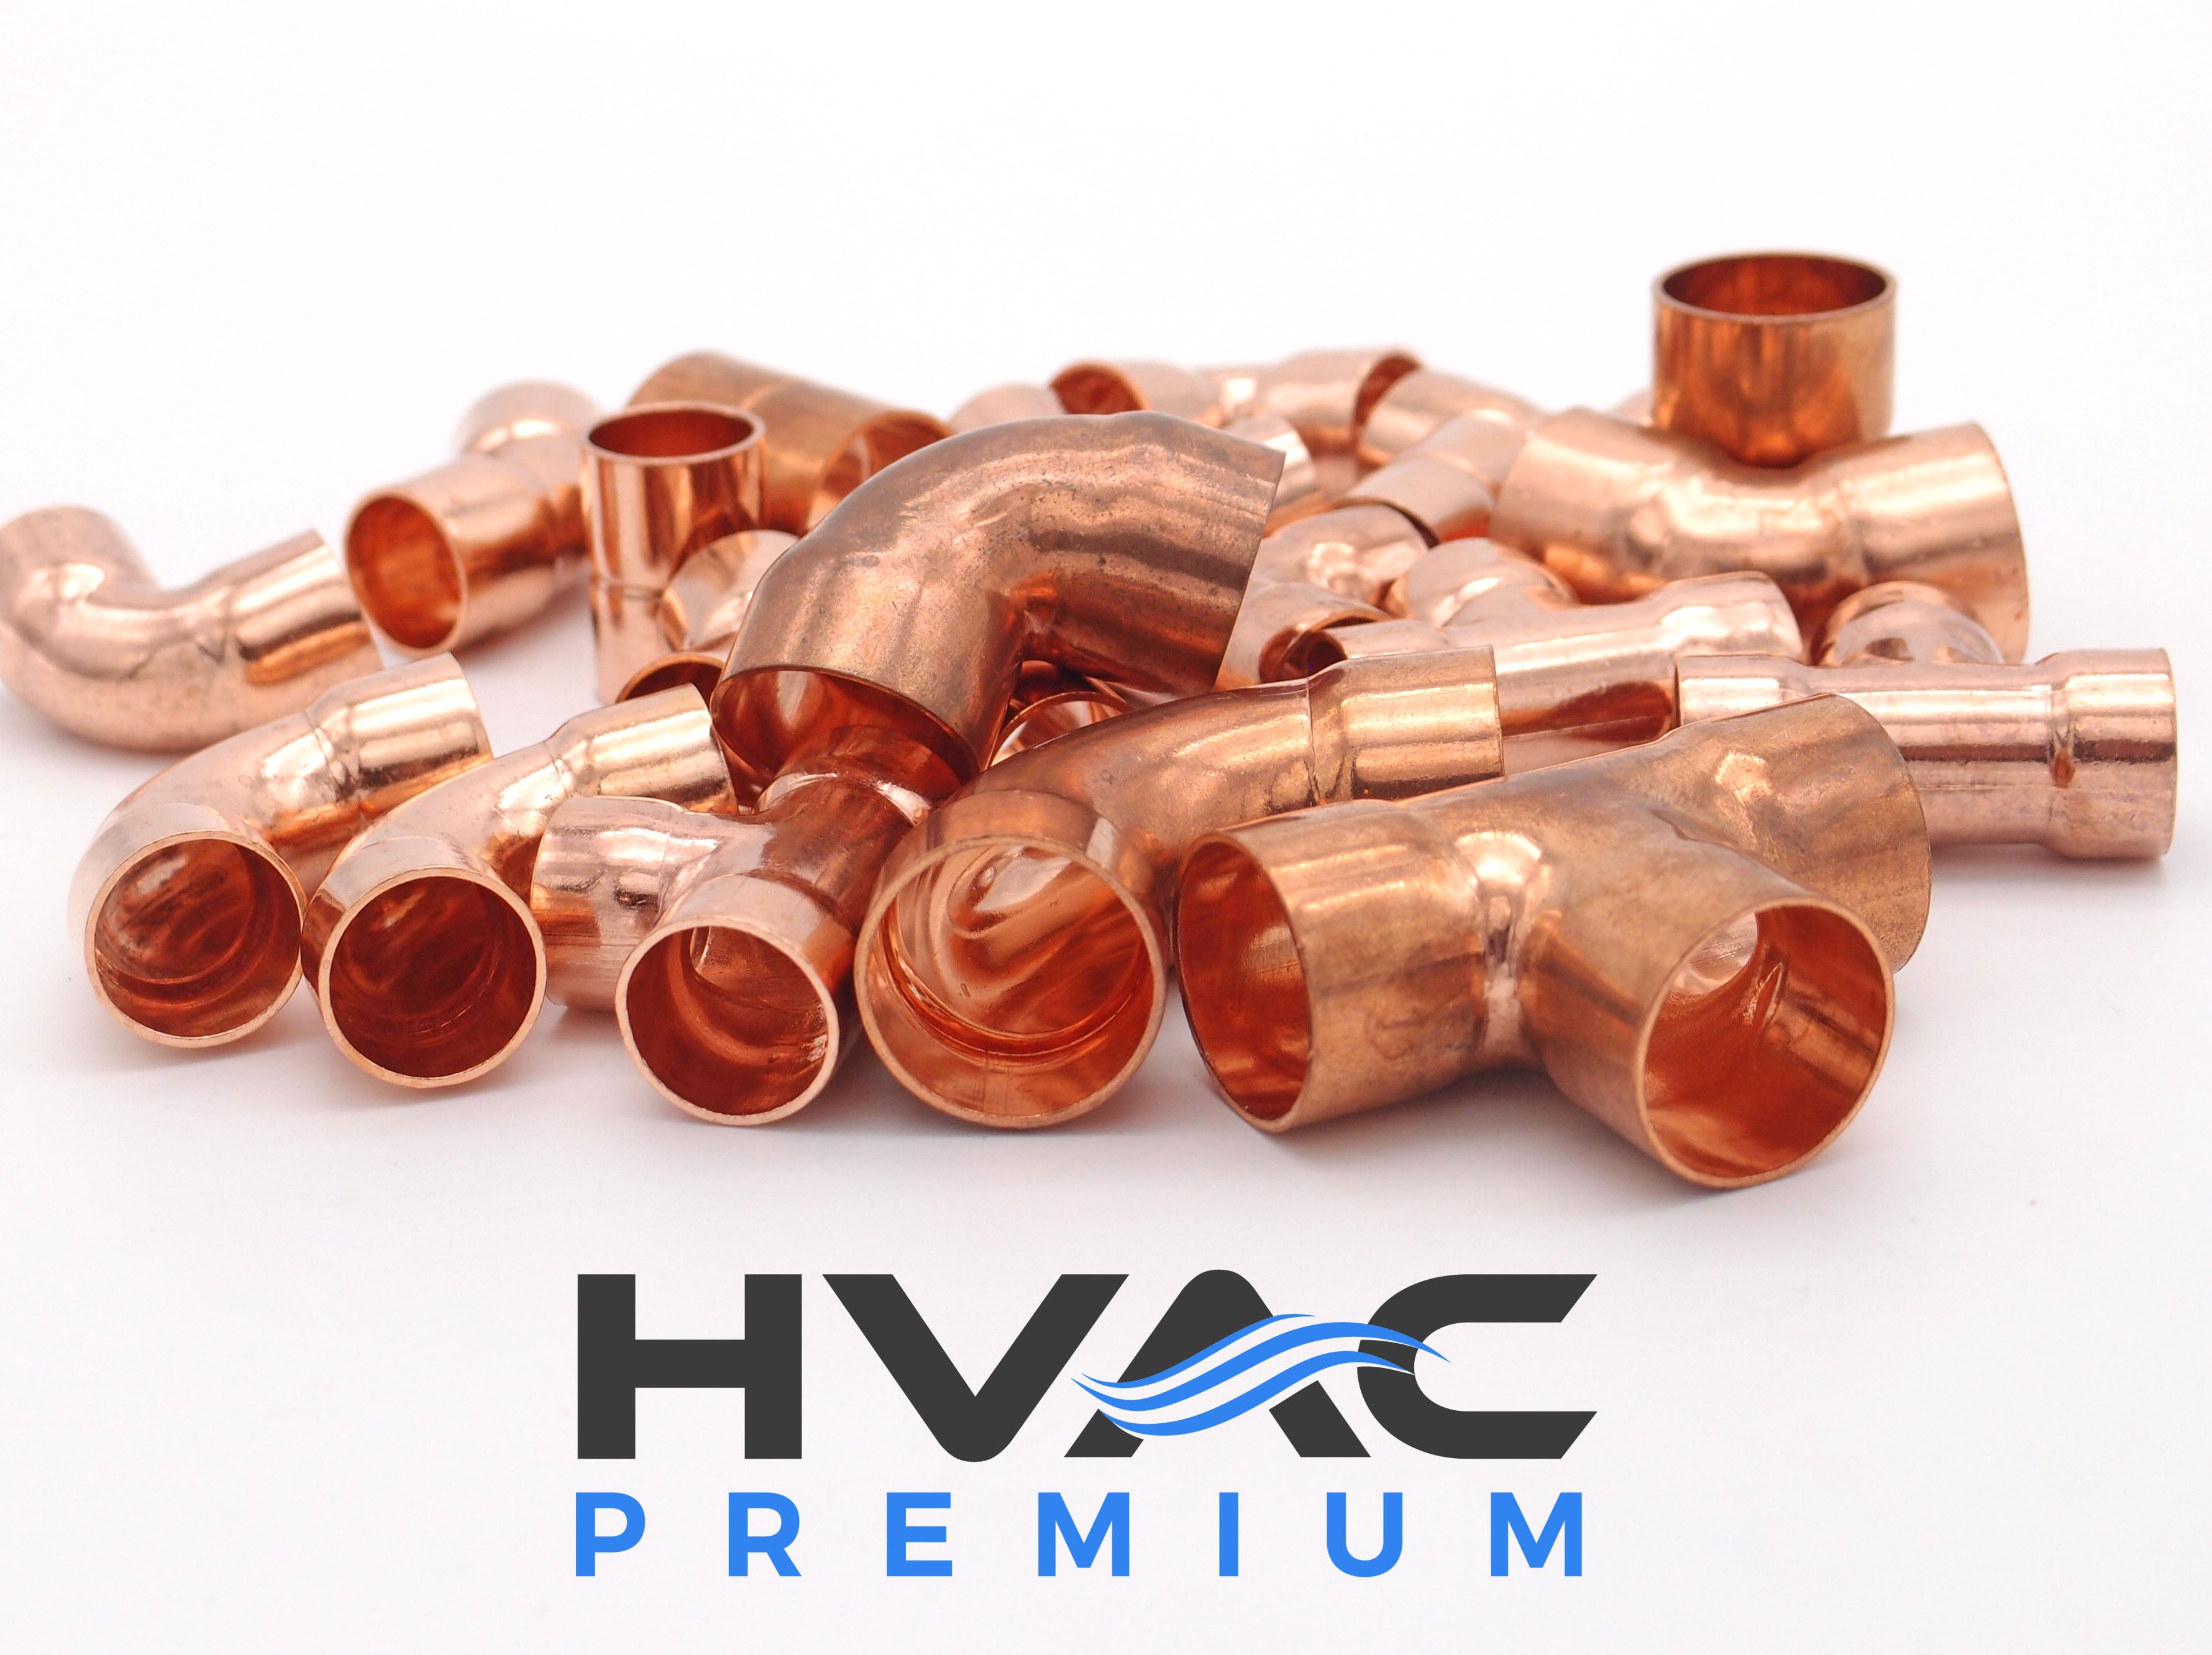 Copper Fitting 3/8 to 1/4 (HVAC Dimensions) Reducer / Increaser Copper Coupling & HVAC – 1/4 to 1/8 (Plumbing Inner Dimensions) 99.9% Pure Copper - 5 Pack